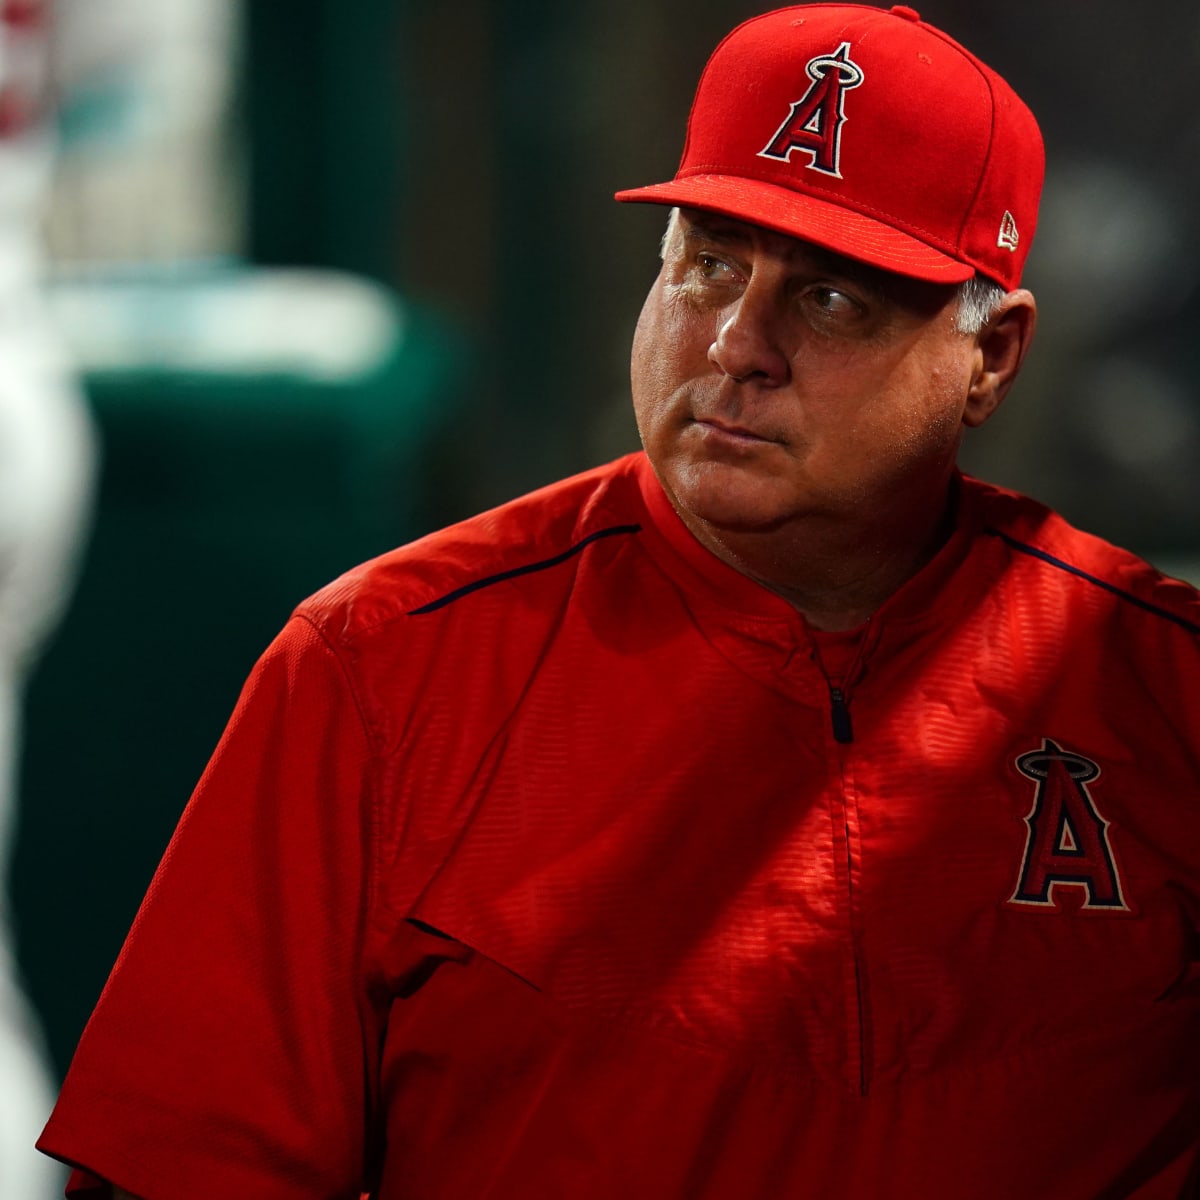 Angels manager Mike Scioscia not returning for 2019 - Sports